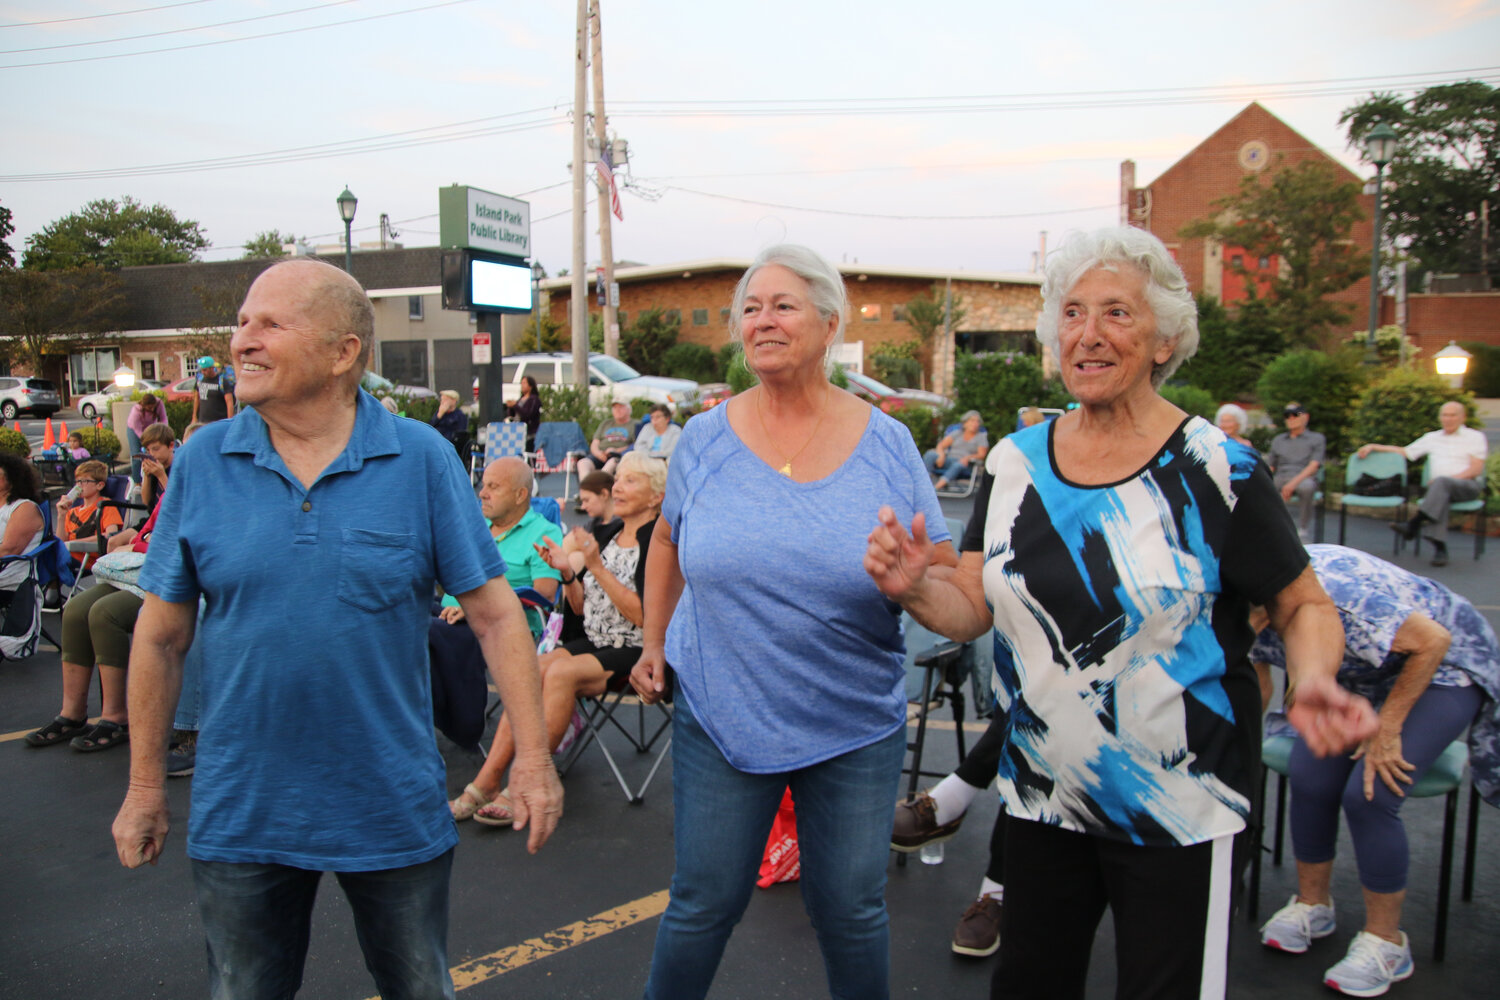 Lenny Dunn, Gloria Marsala, Linda Esposito were dancing throughout the night to the music.